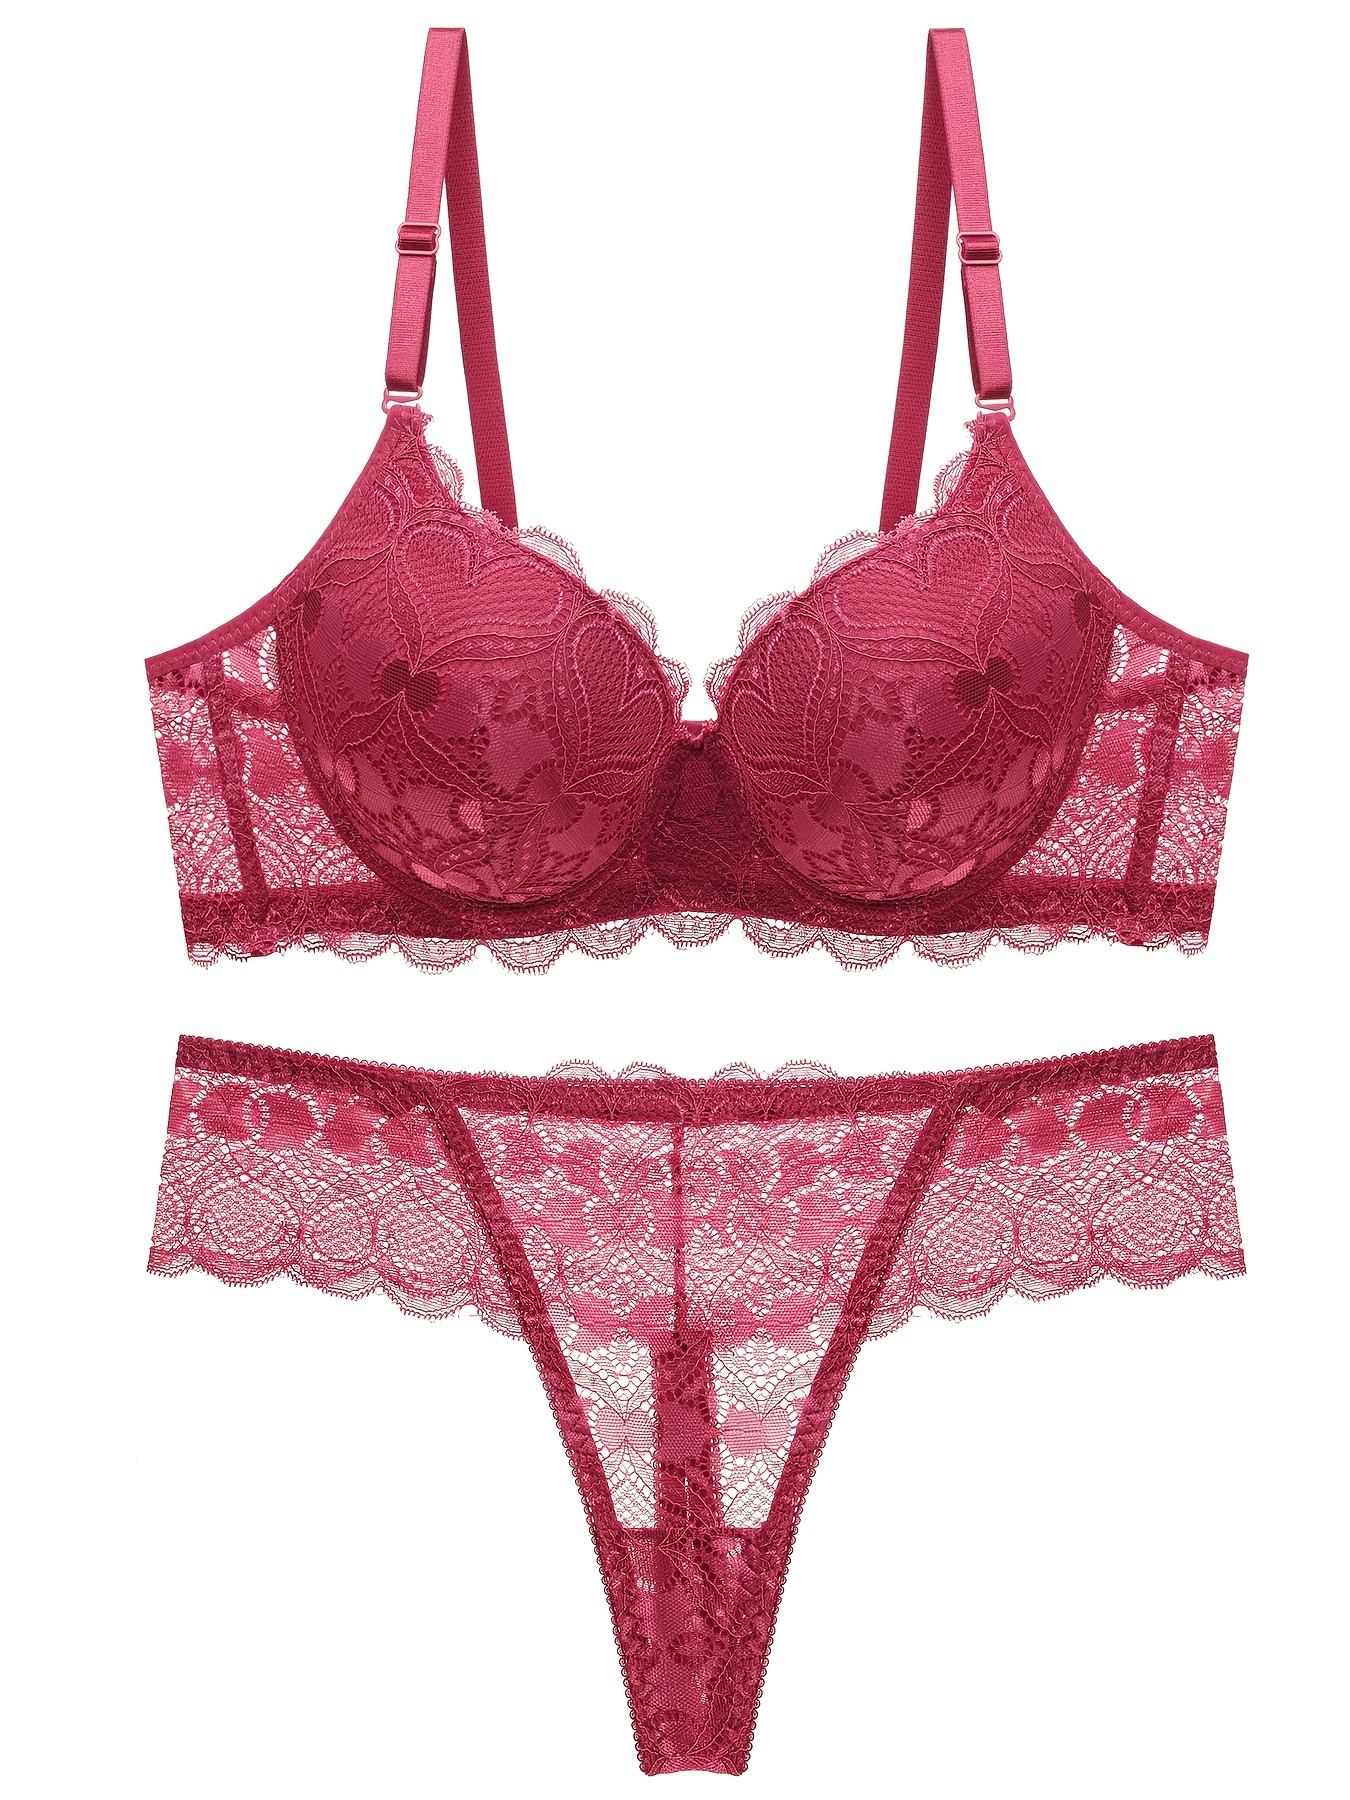 Womens Valentines Day Red Lace T Back Sexy Lingerie Panties With Rose  Pattern From Vivian5168, $0.7